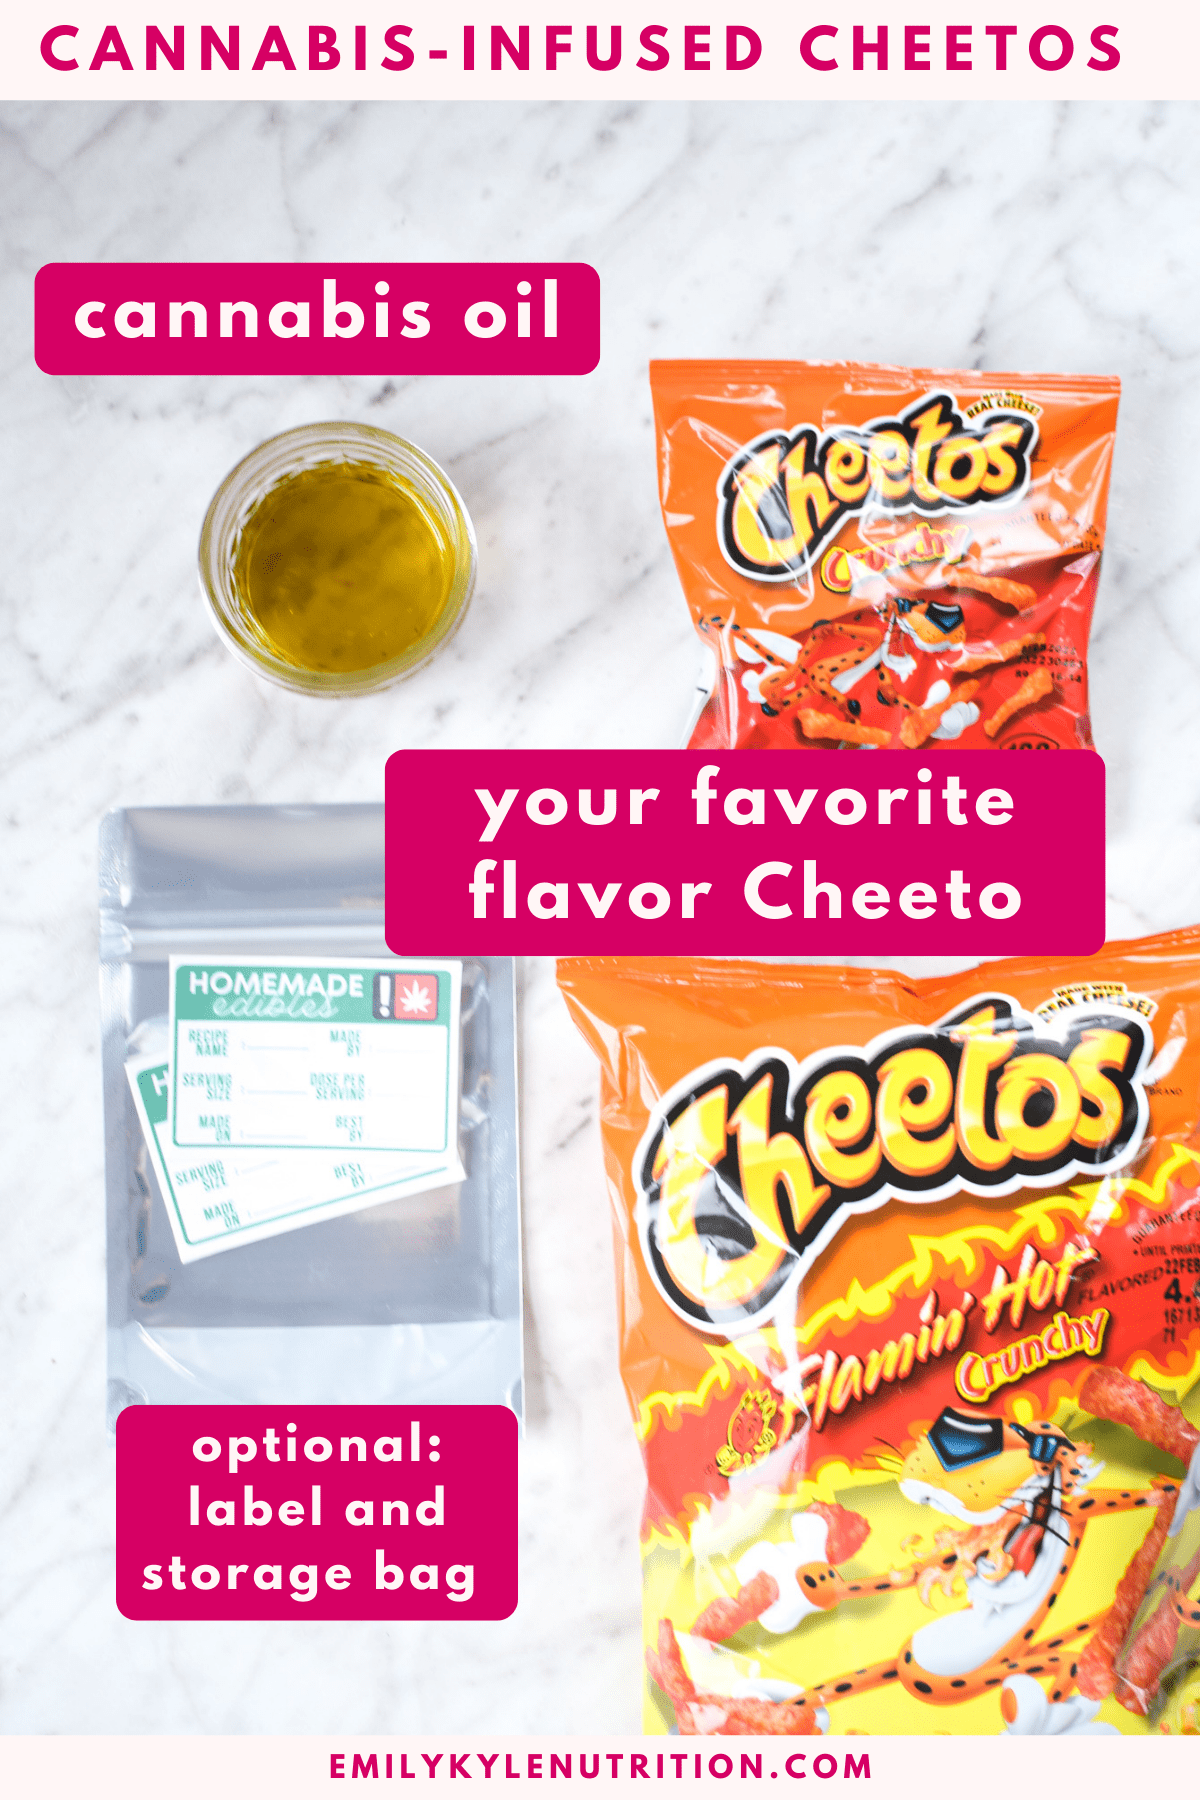 All of the ingredients needed to make cannabis Cheetos.